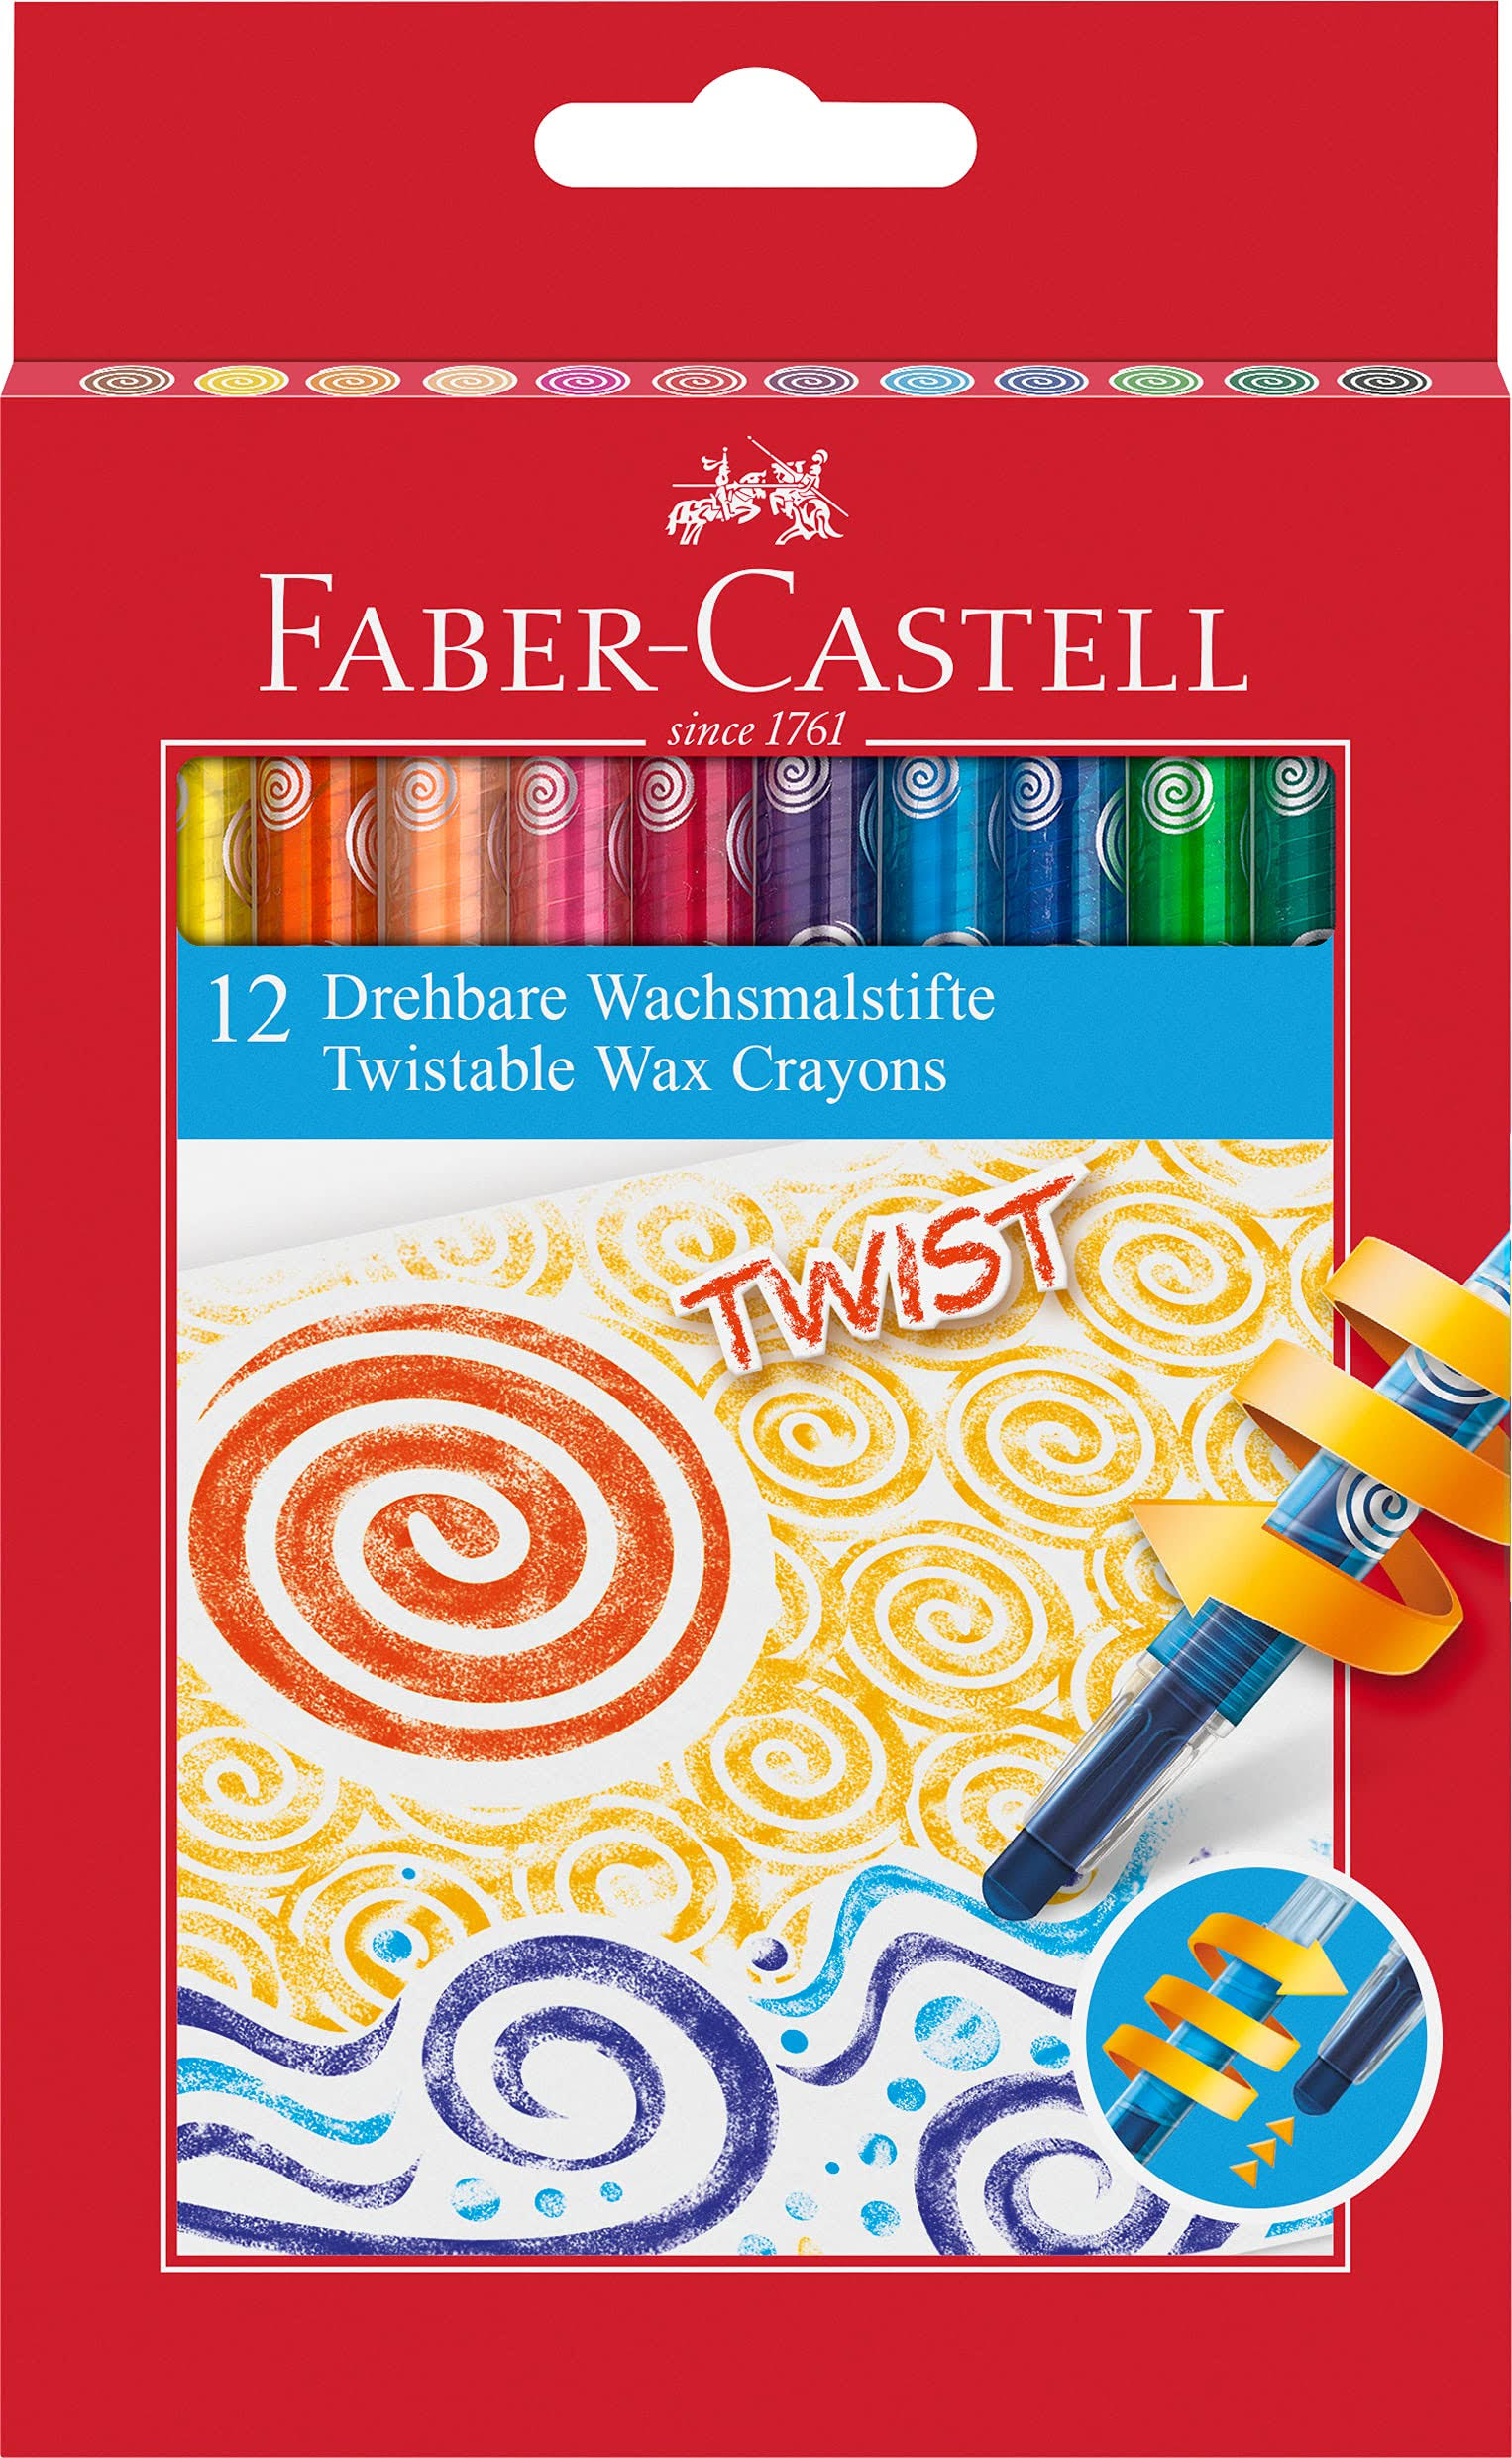 Faber-Castell 120003 Twistable Wax Crayons (Pack of 12)